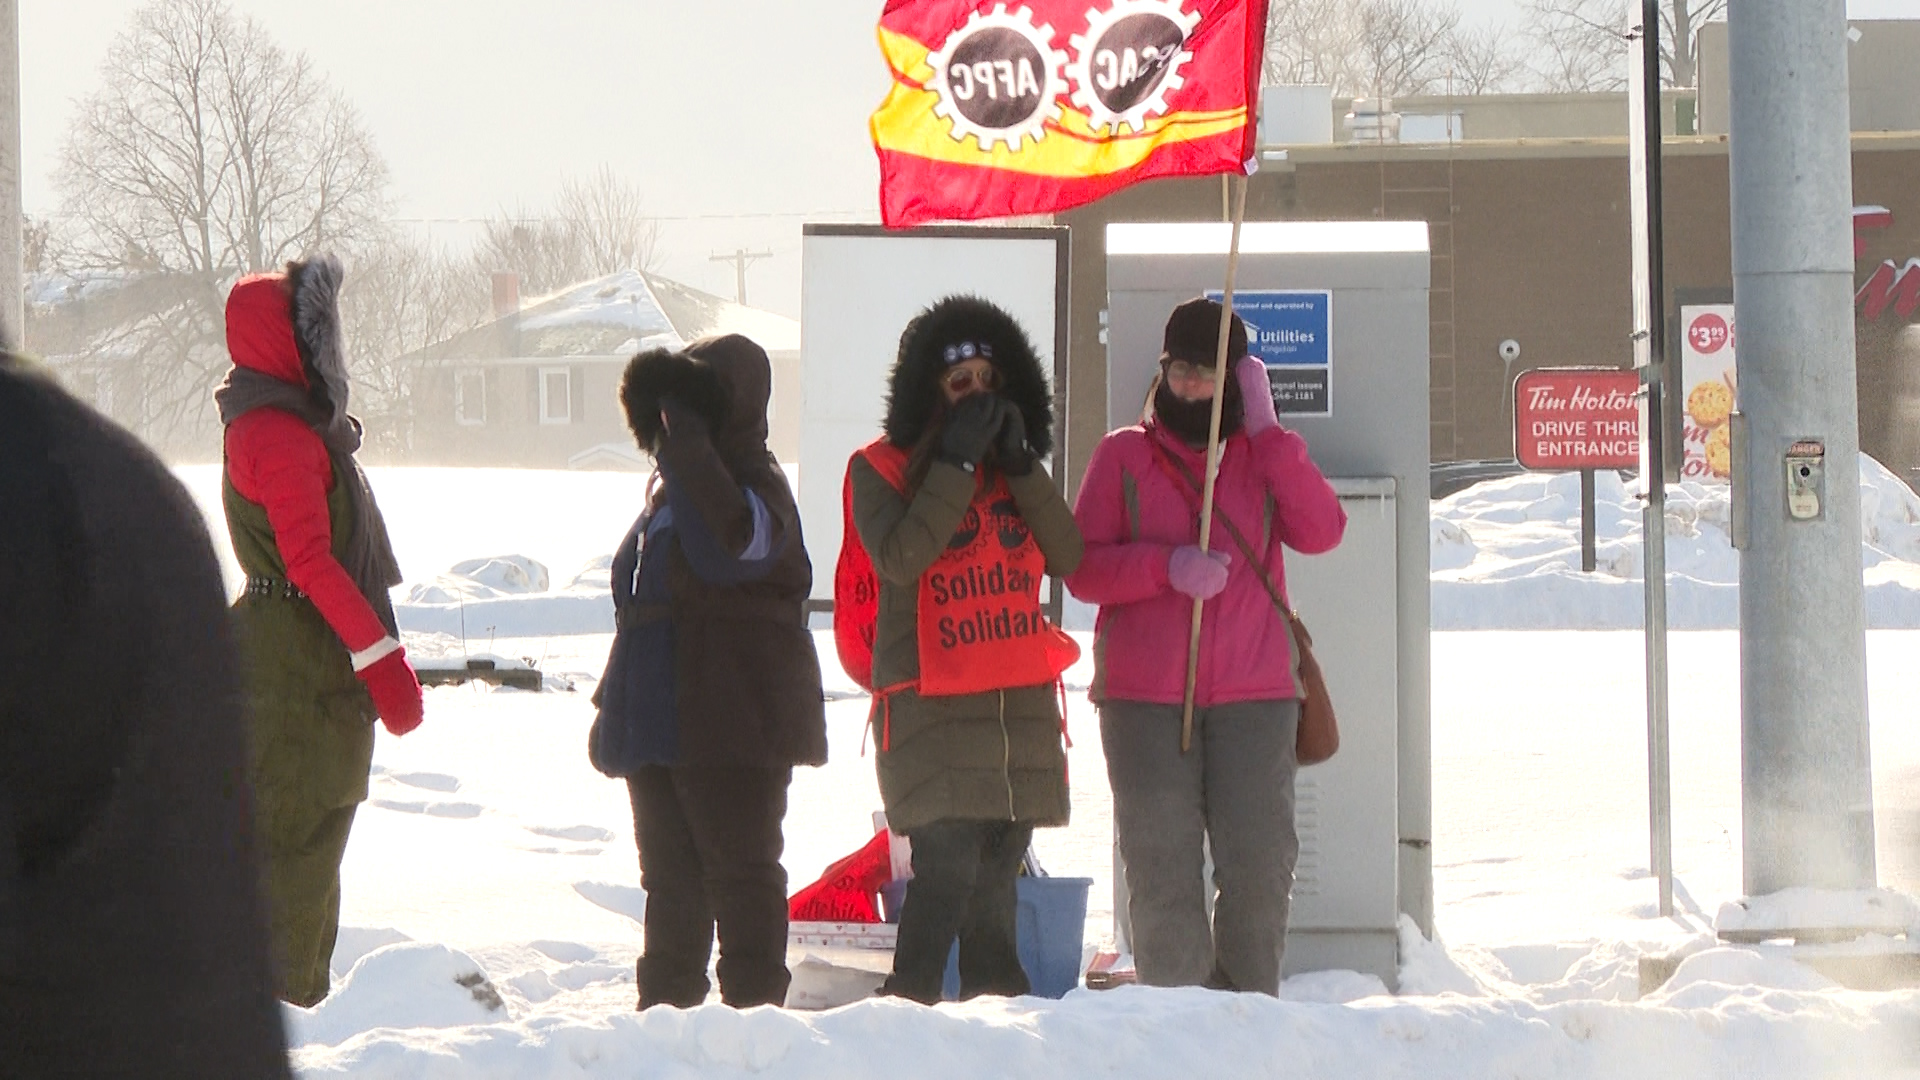 Civilian employees at RMC and CFB Kingston continue their strike